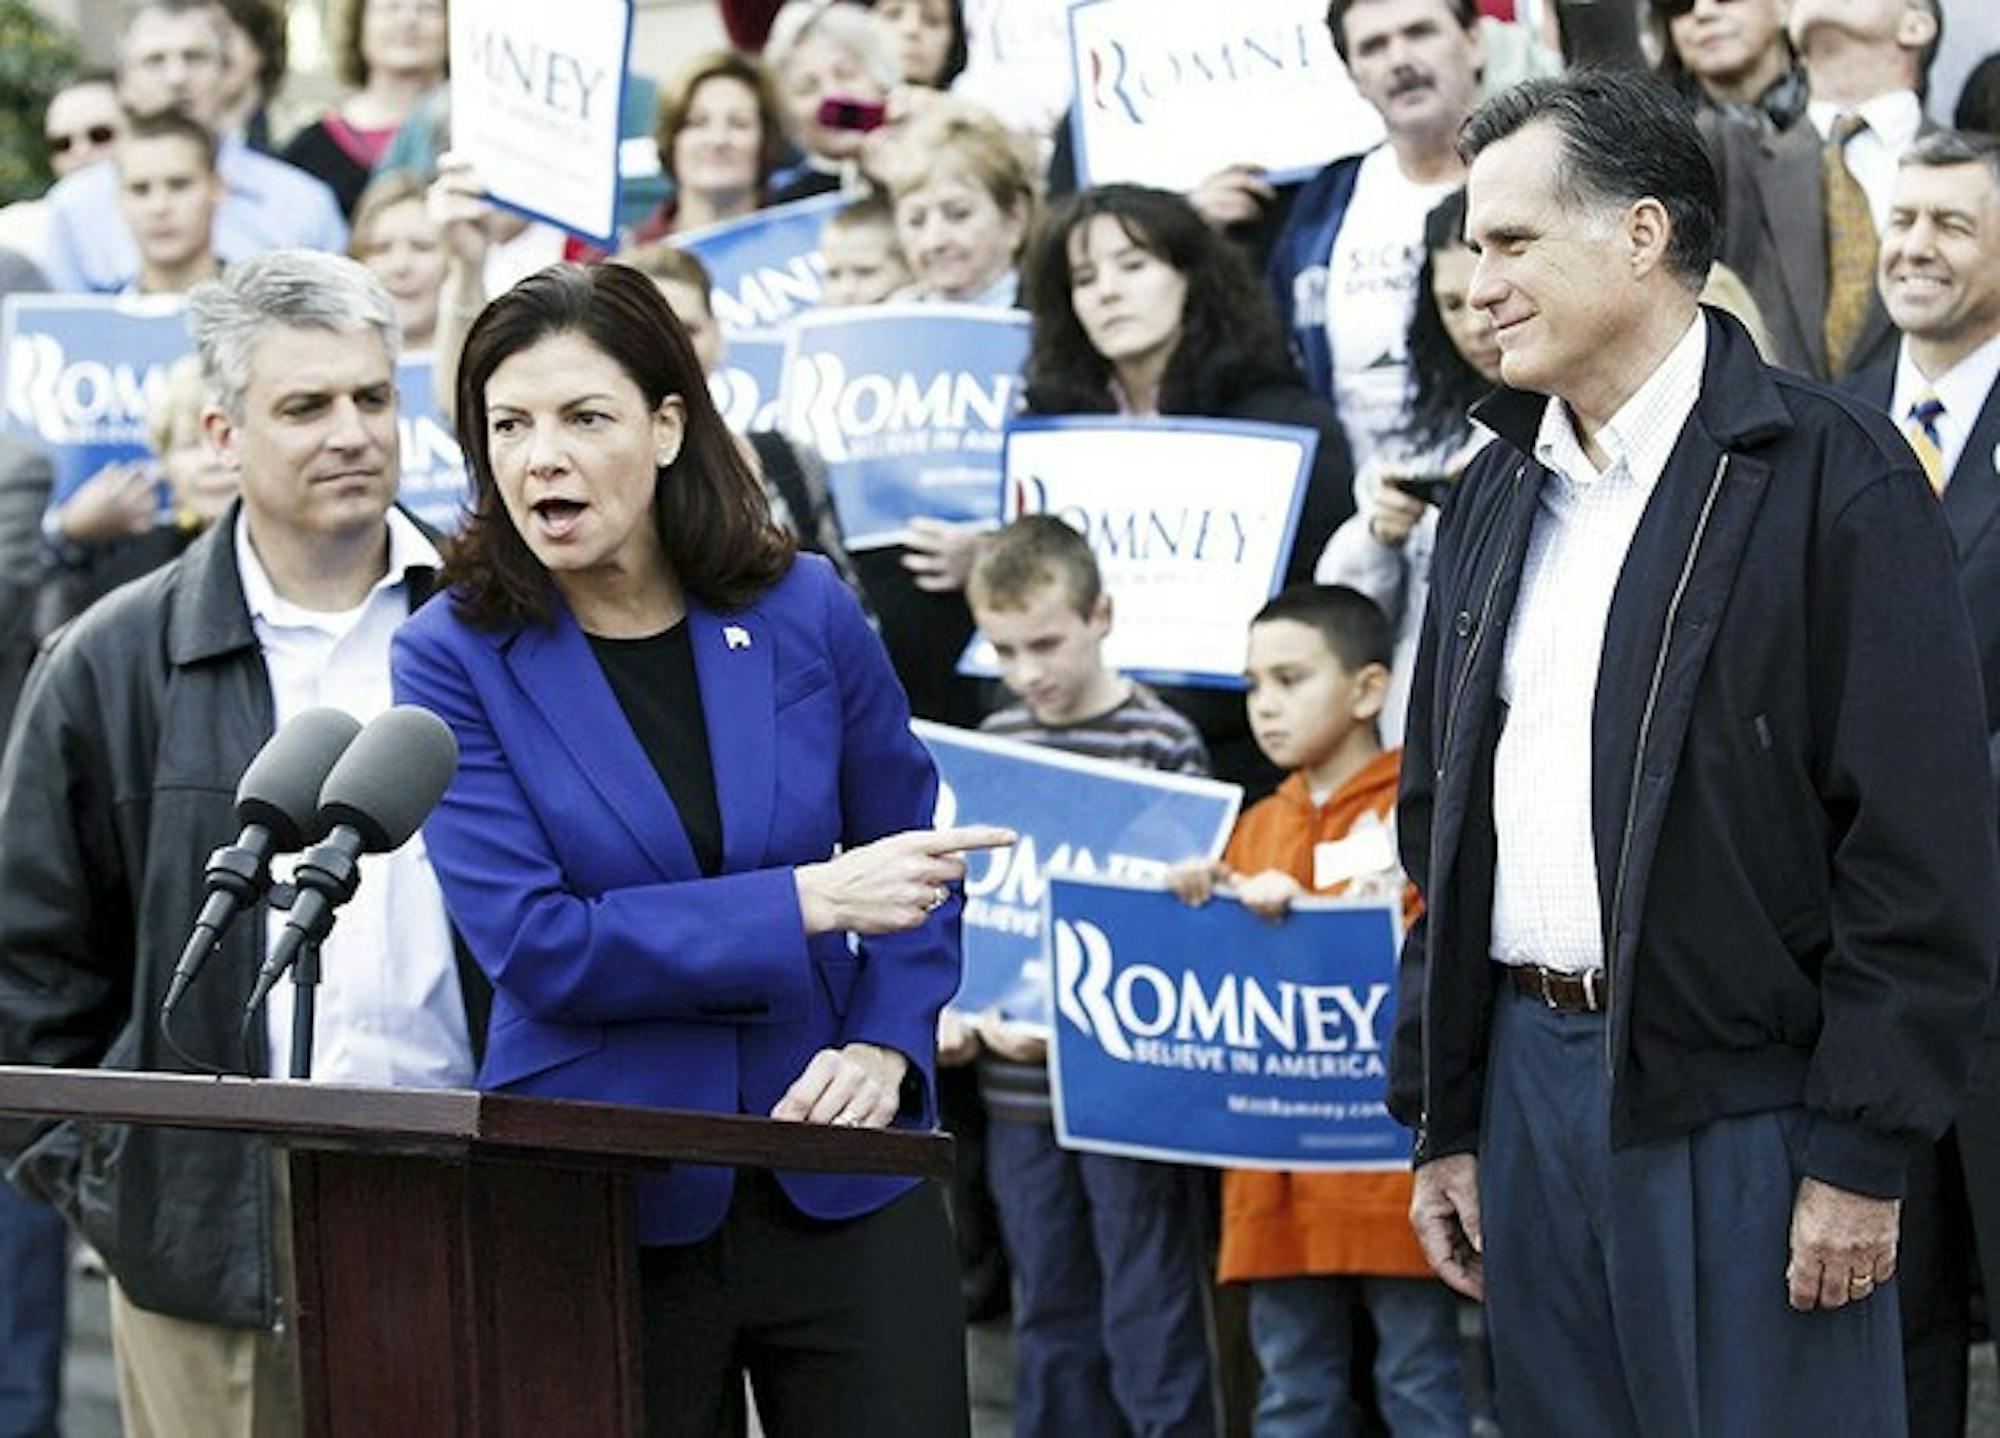 Republican presidential candidate Mitt Romney campaigned with Sen. Kelly Ayotte on Monday, fueling speculation that Ayotte is on his vice-presidential short list.